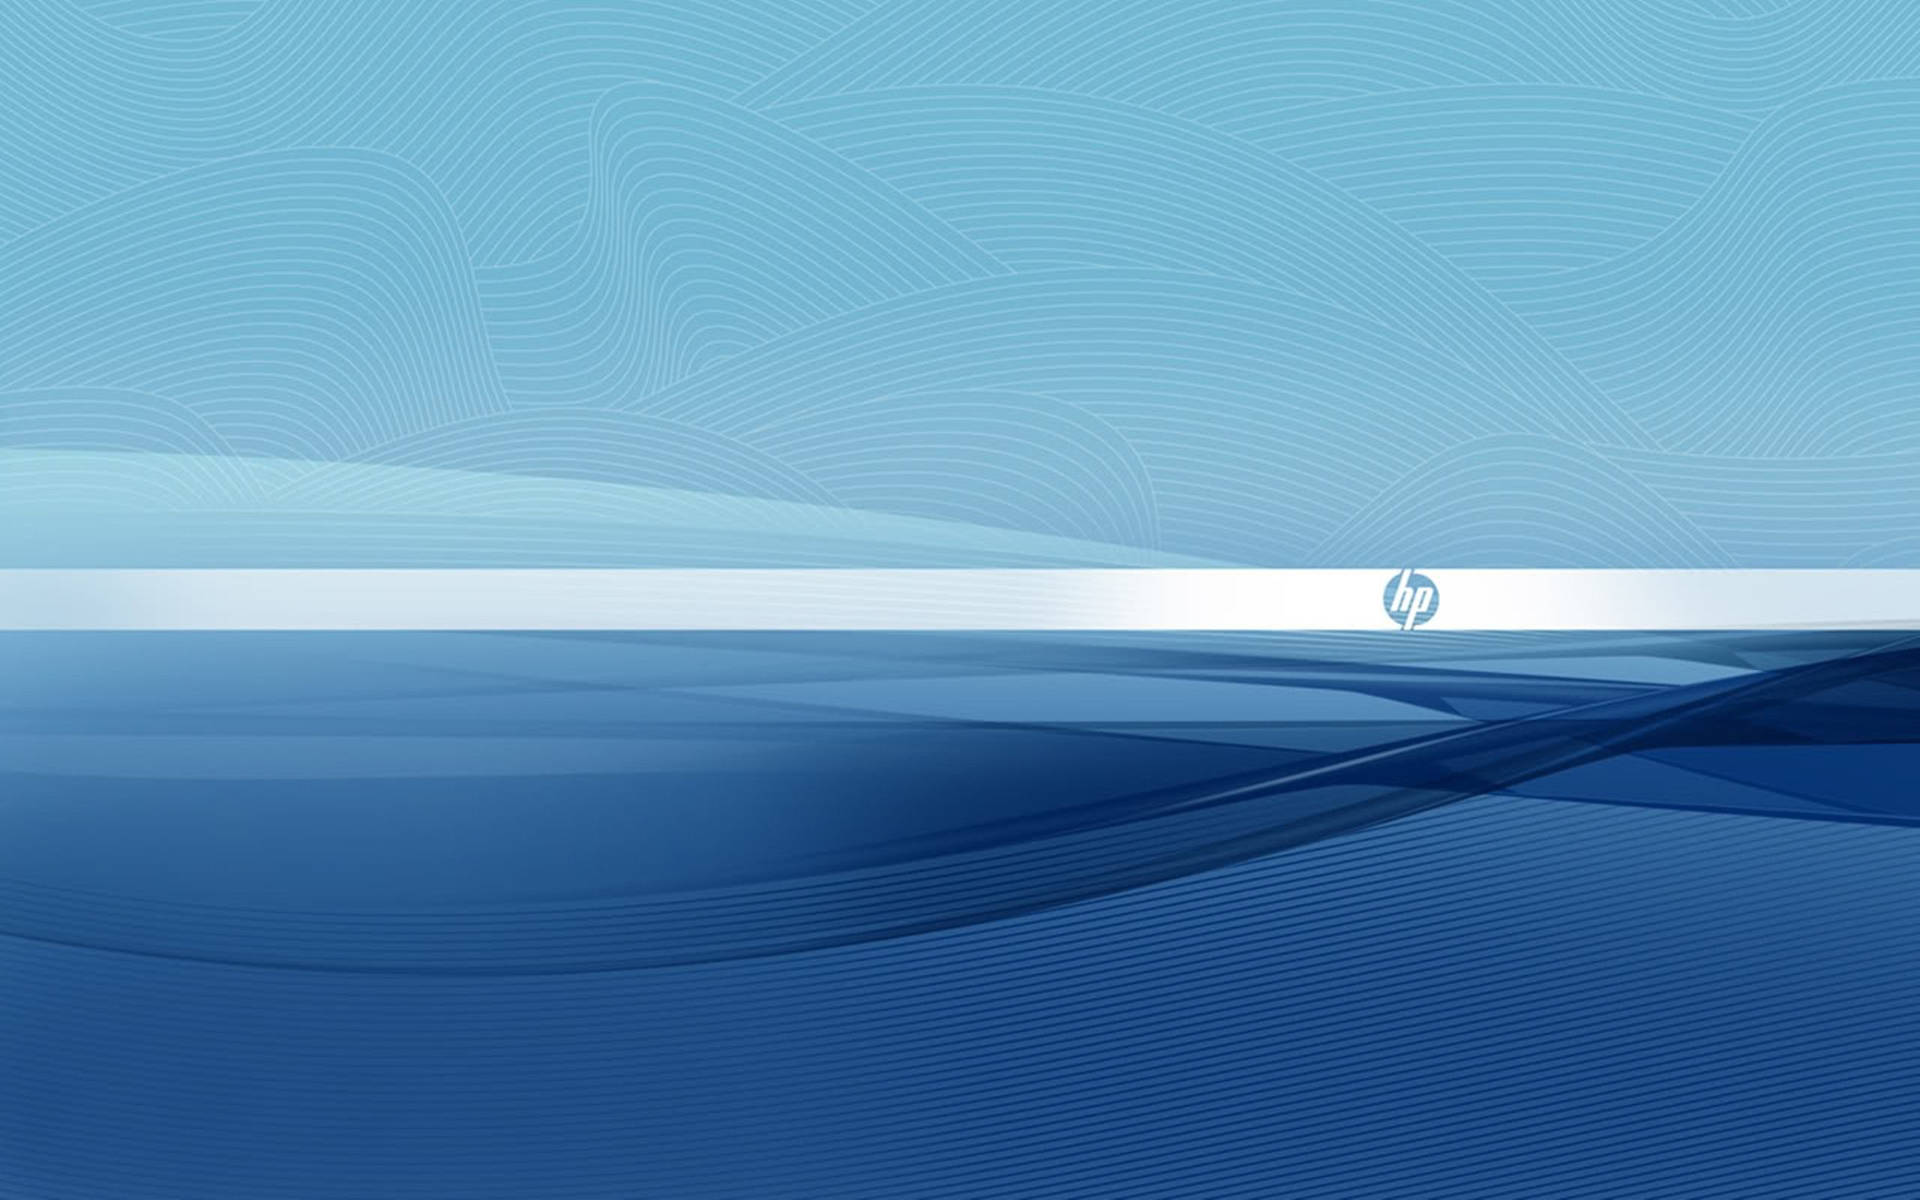 Hp 2560X1600 Wallpaper and Background Image